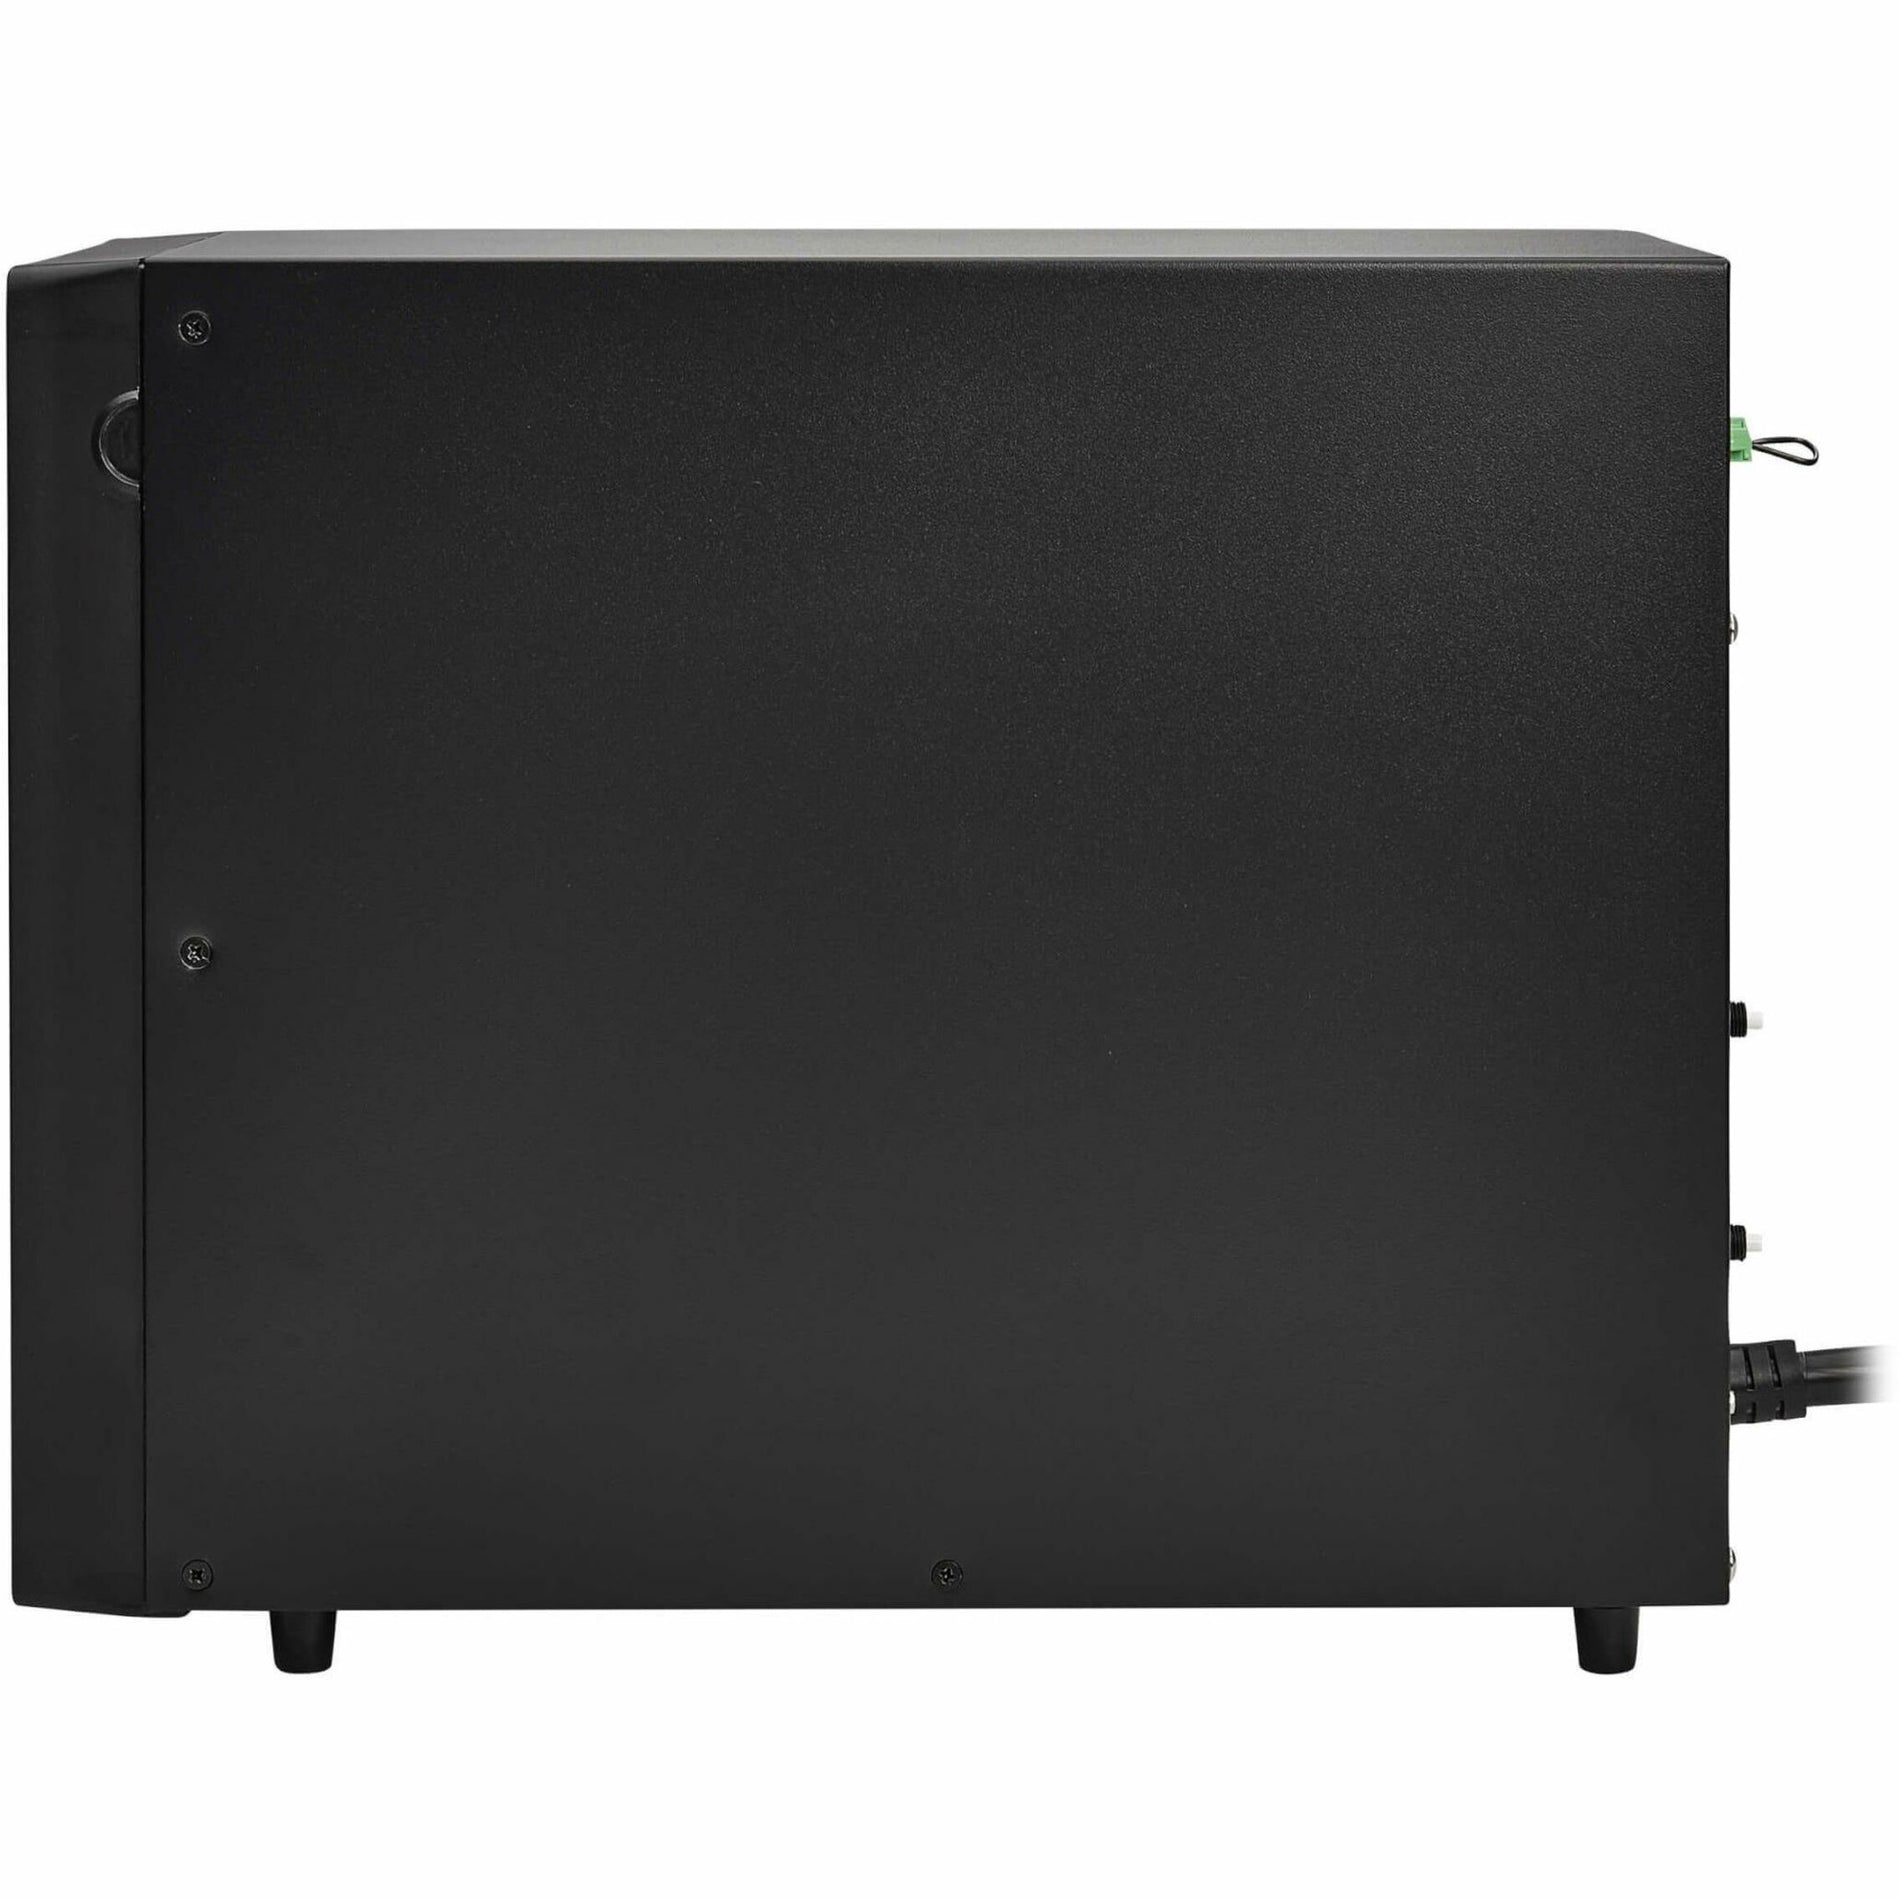 Tripp Lite SU3000XLCD SmartOnline 3000VA Tower UPS, 2700W Load Capacity, Hot Swappable Battery, SNMP Manageable